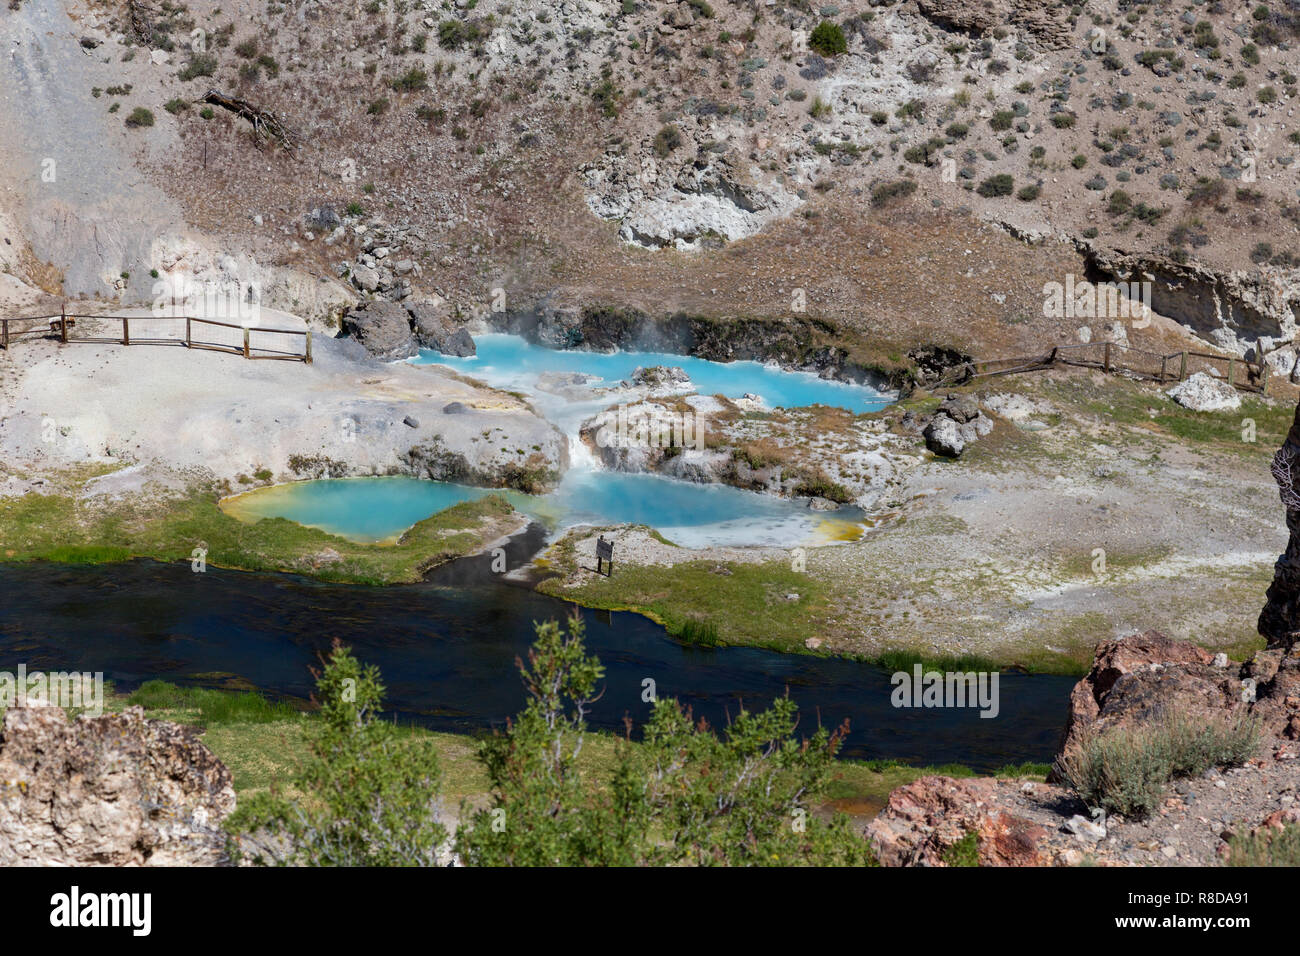 Hot Creek has dozens of natural hot springs bubbling up within the rocky walls of a river gorge and in the shadows of towering Eastern Sierra mountain Stock Photo